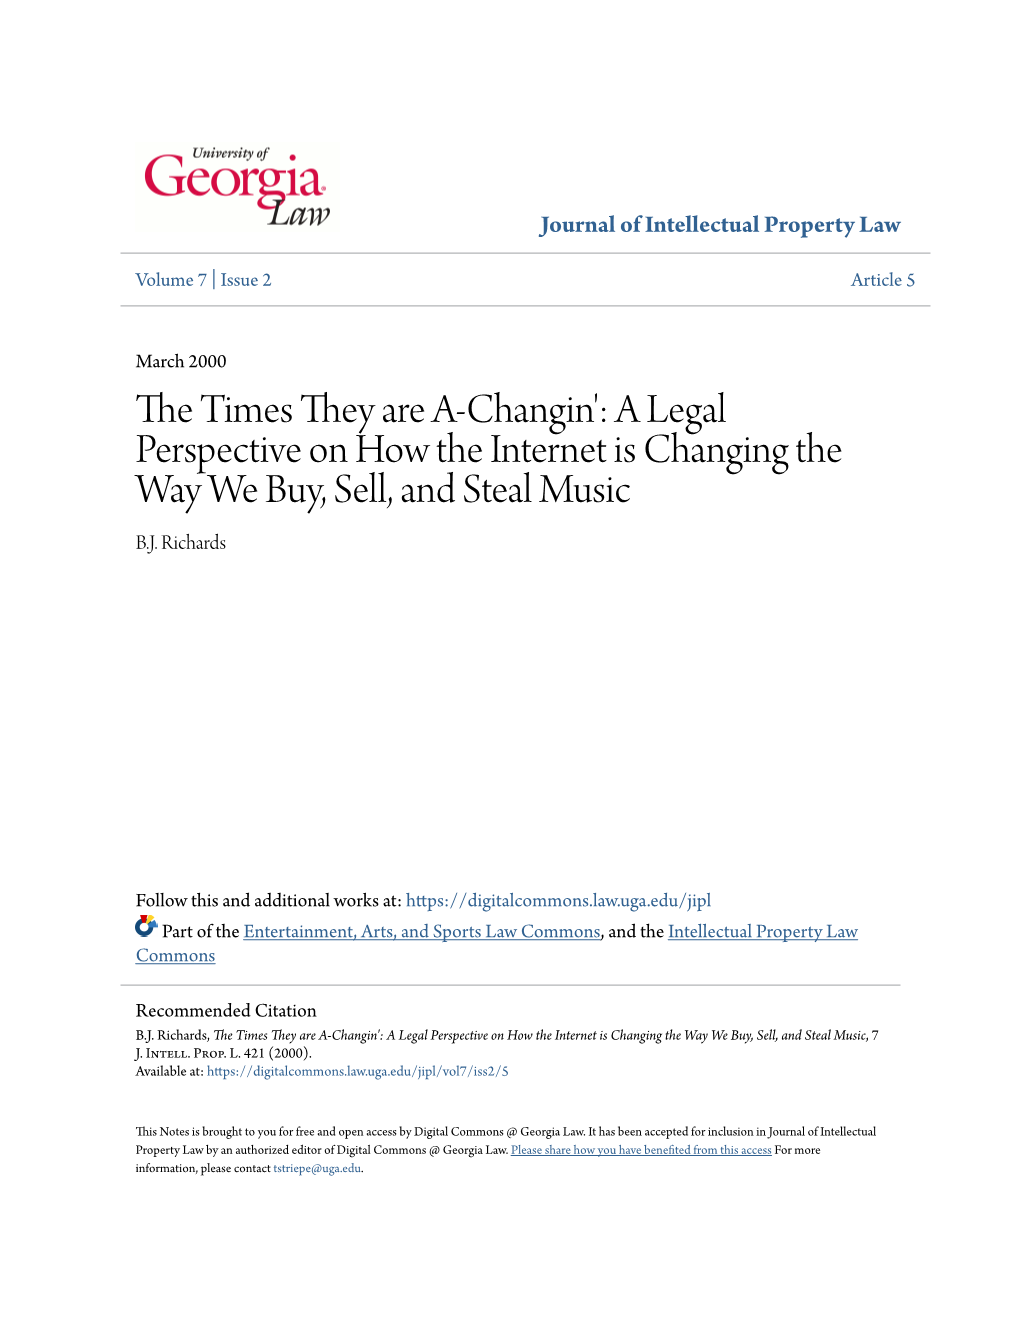 The Times They Are A-Changin': a Legal Perspective on How the Internet Is Changing the Way We Buy, Sell, and Steal Music, 7 J